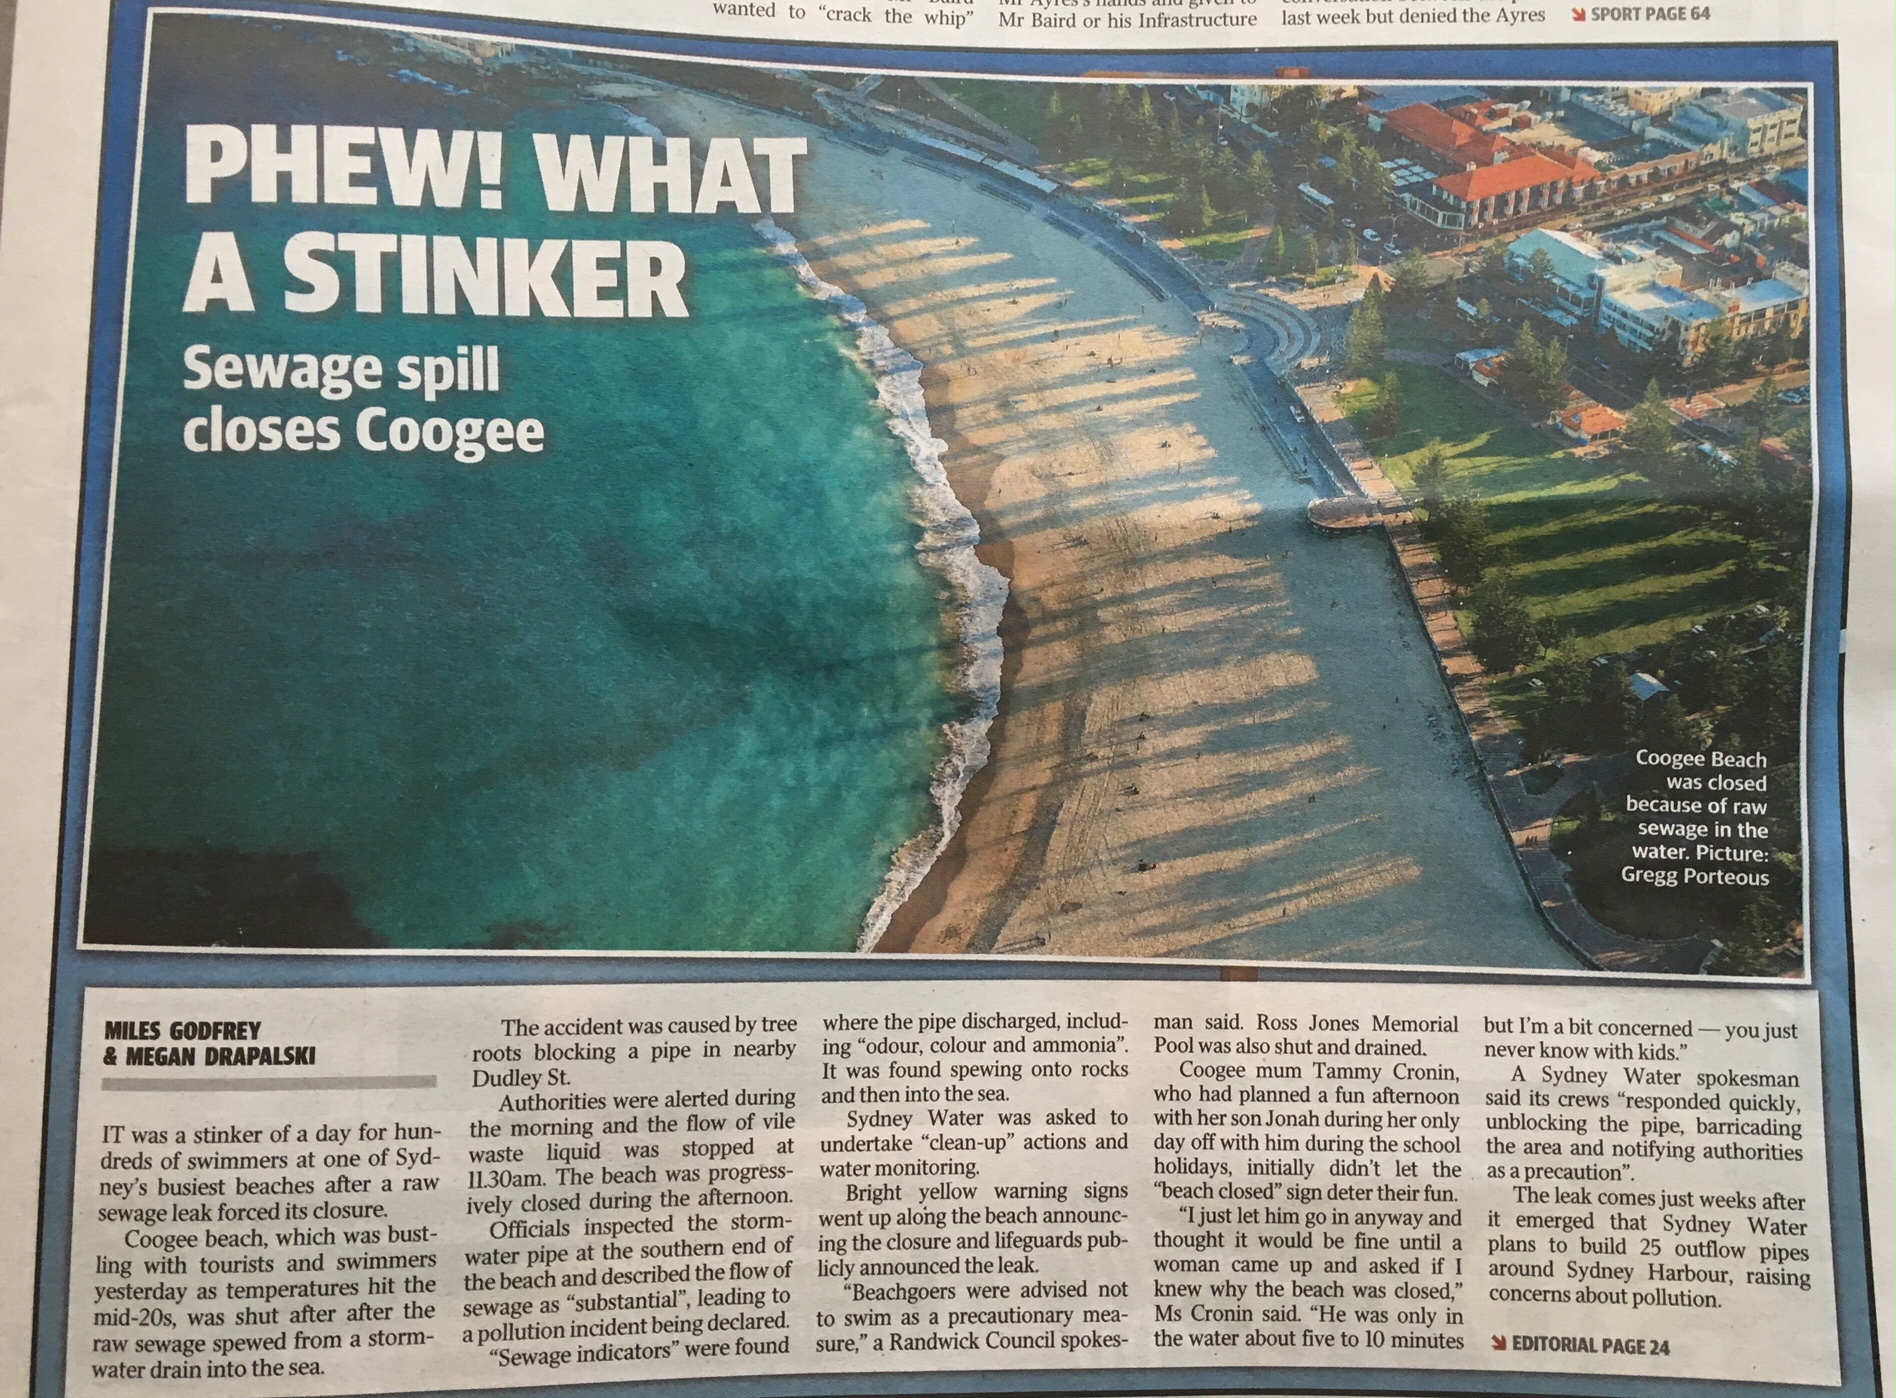 2016 04 14 Cooge sewer spill Daily Telegraph article